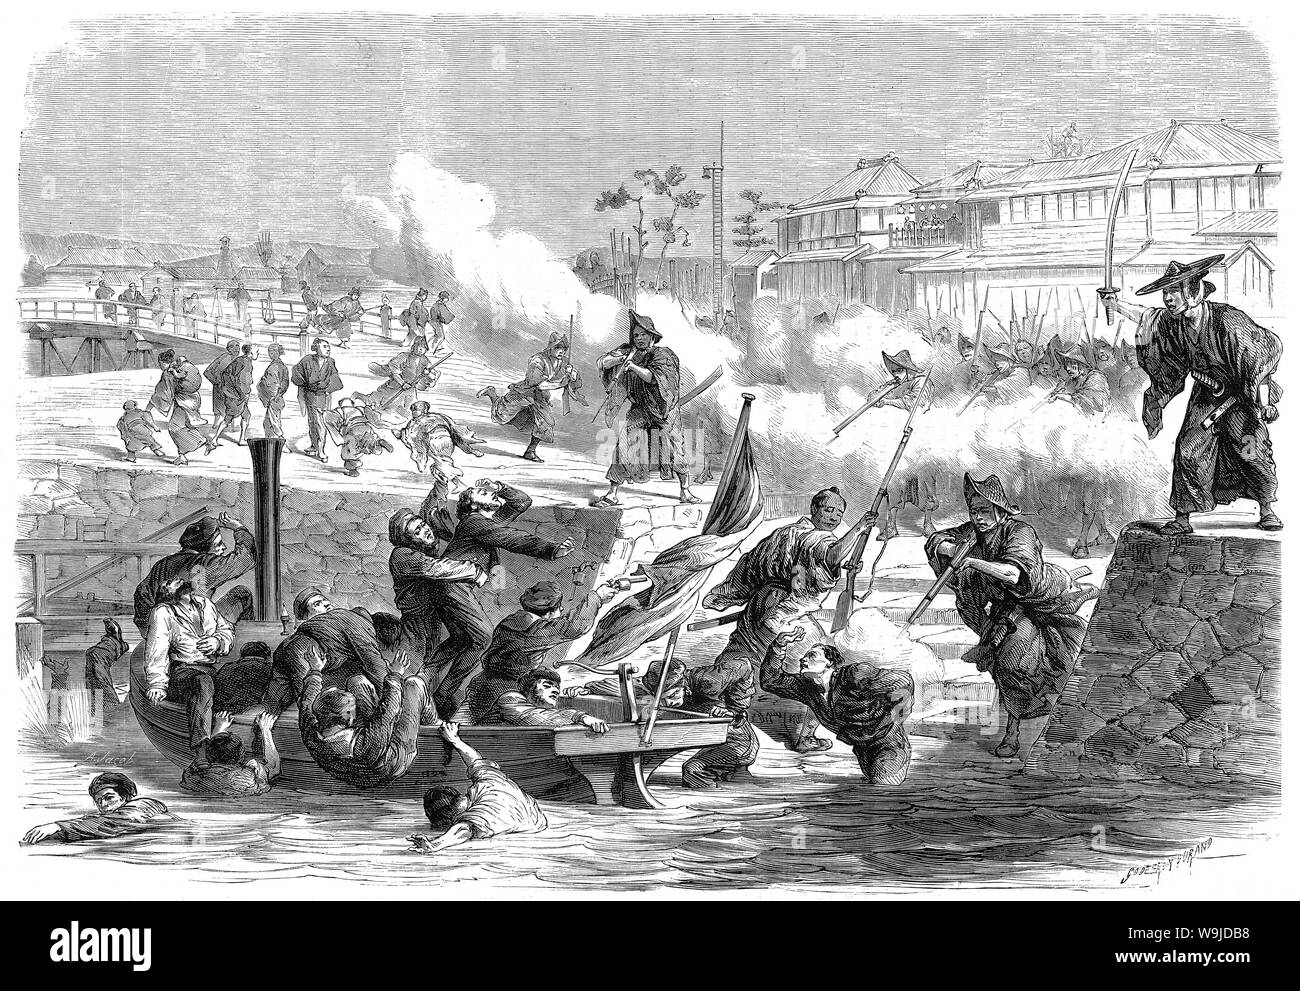 [ 1860s Japan - Samurai Attack French Sailors at Sakai near Osaka ] —   Sakai incident (堺事件, Sakai Jiken). Samurai of Tosa Province (in current Kochi Prefecture) attacked crew members of the French corvette Dupleix when they landed at Sakai near Osaka on March 8, 1868 (Keio 4).   Twelve Frenchmen were killed. Twenty of the samurai were sentenced to death by seppuku, but the French requested grace for nine.  Published in the French illustrated weekly Le Monde illustré in 1868. Art by French artist Godefroy Durand (1832-1920).  19th century vintage newspaper illustration. Stock Photo